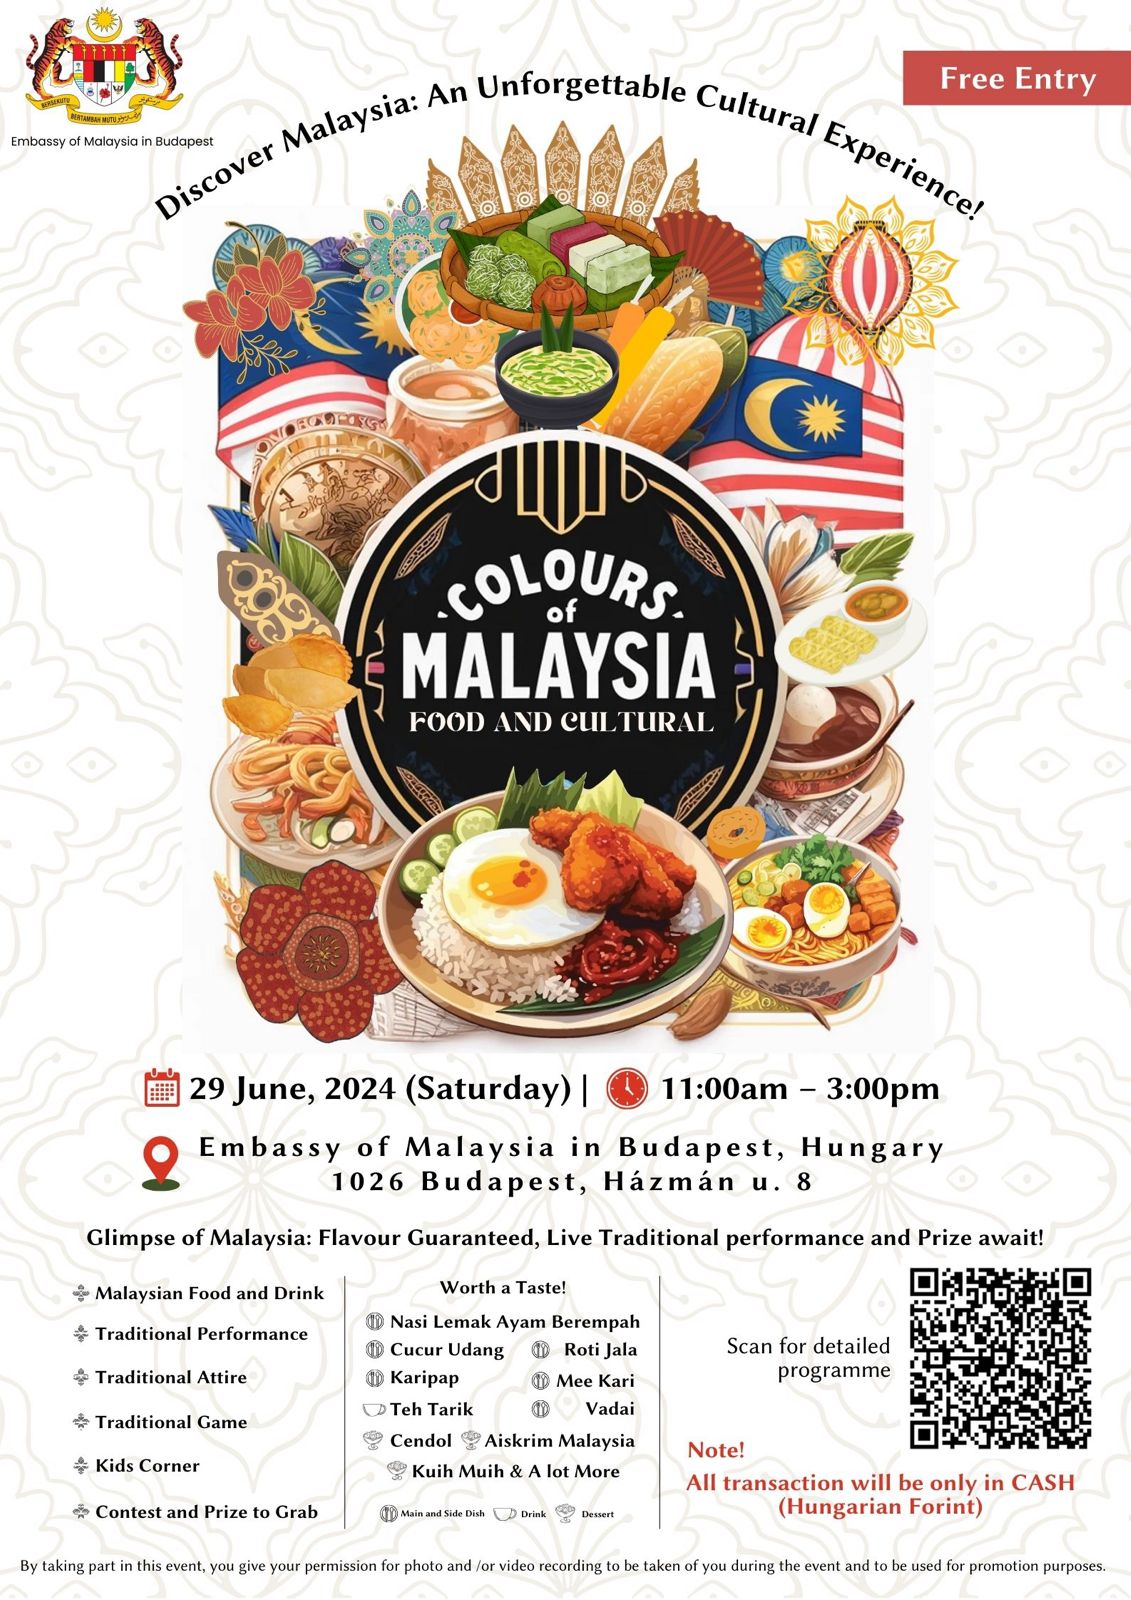 'Colours of Malaysia' Food & Cultural Festival, Budapest, 29 June